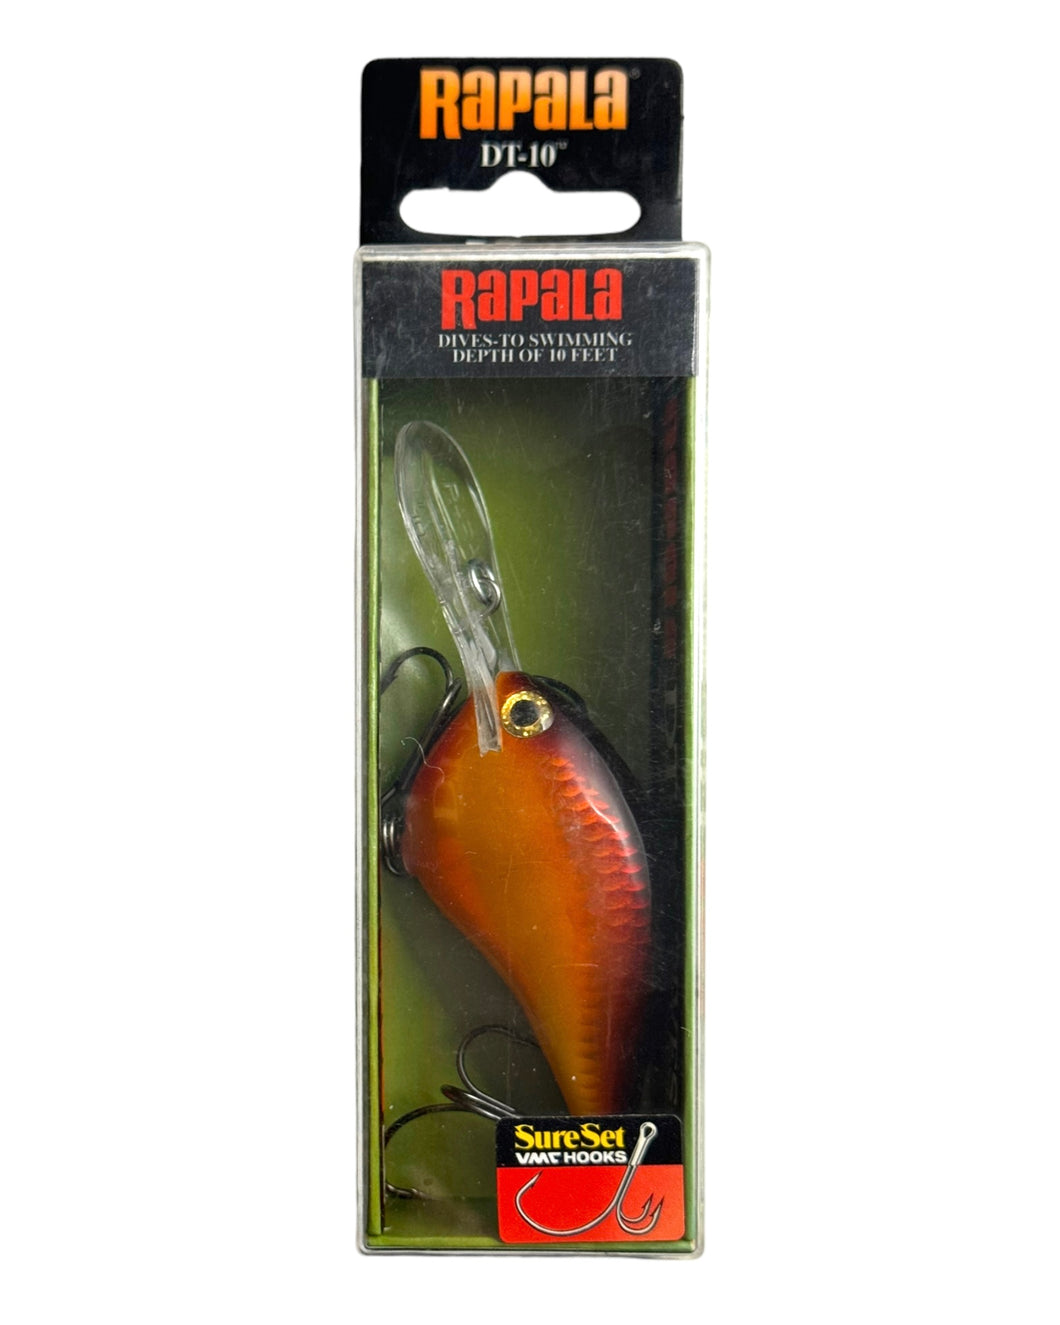 Rapala Lures DT-10 Fishing Lure in CRAWDAD